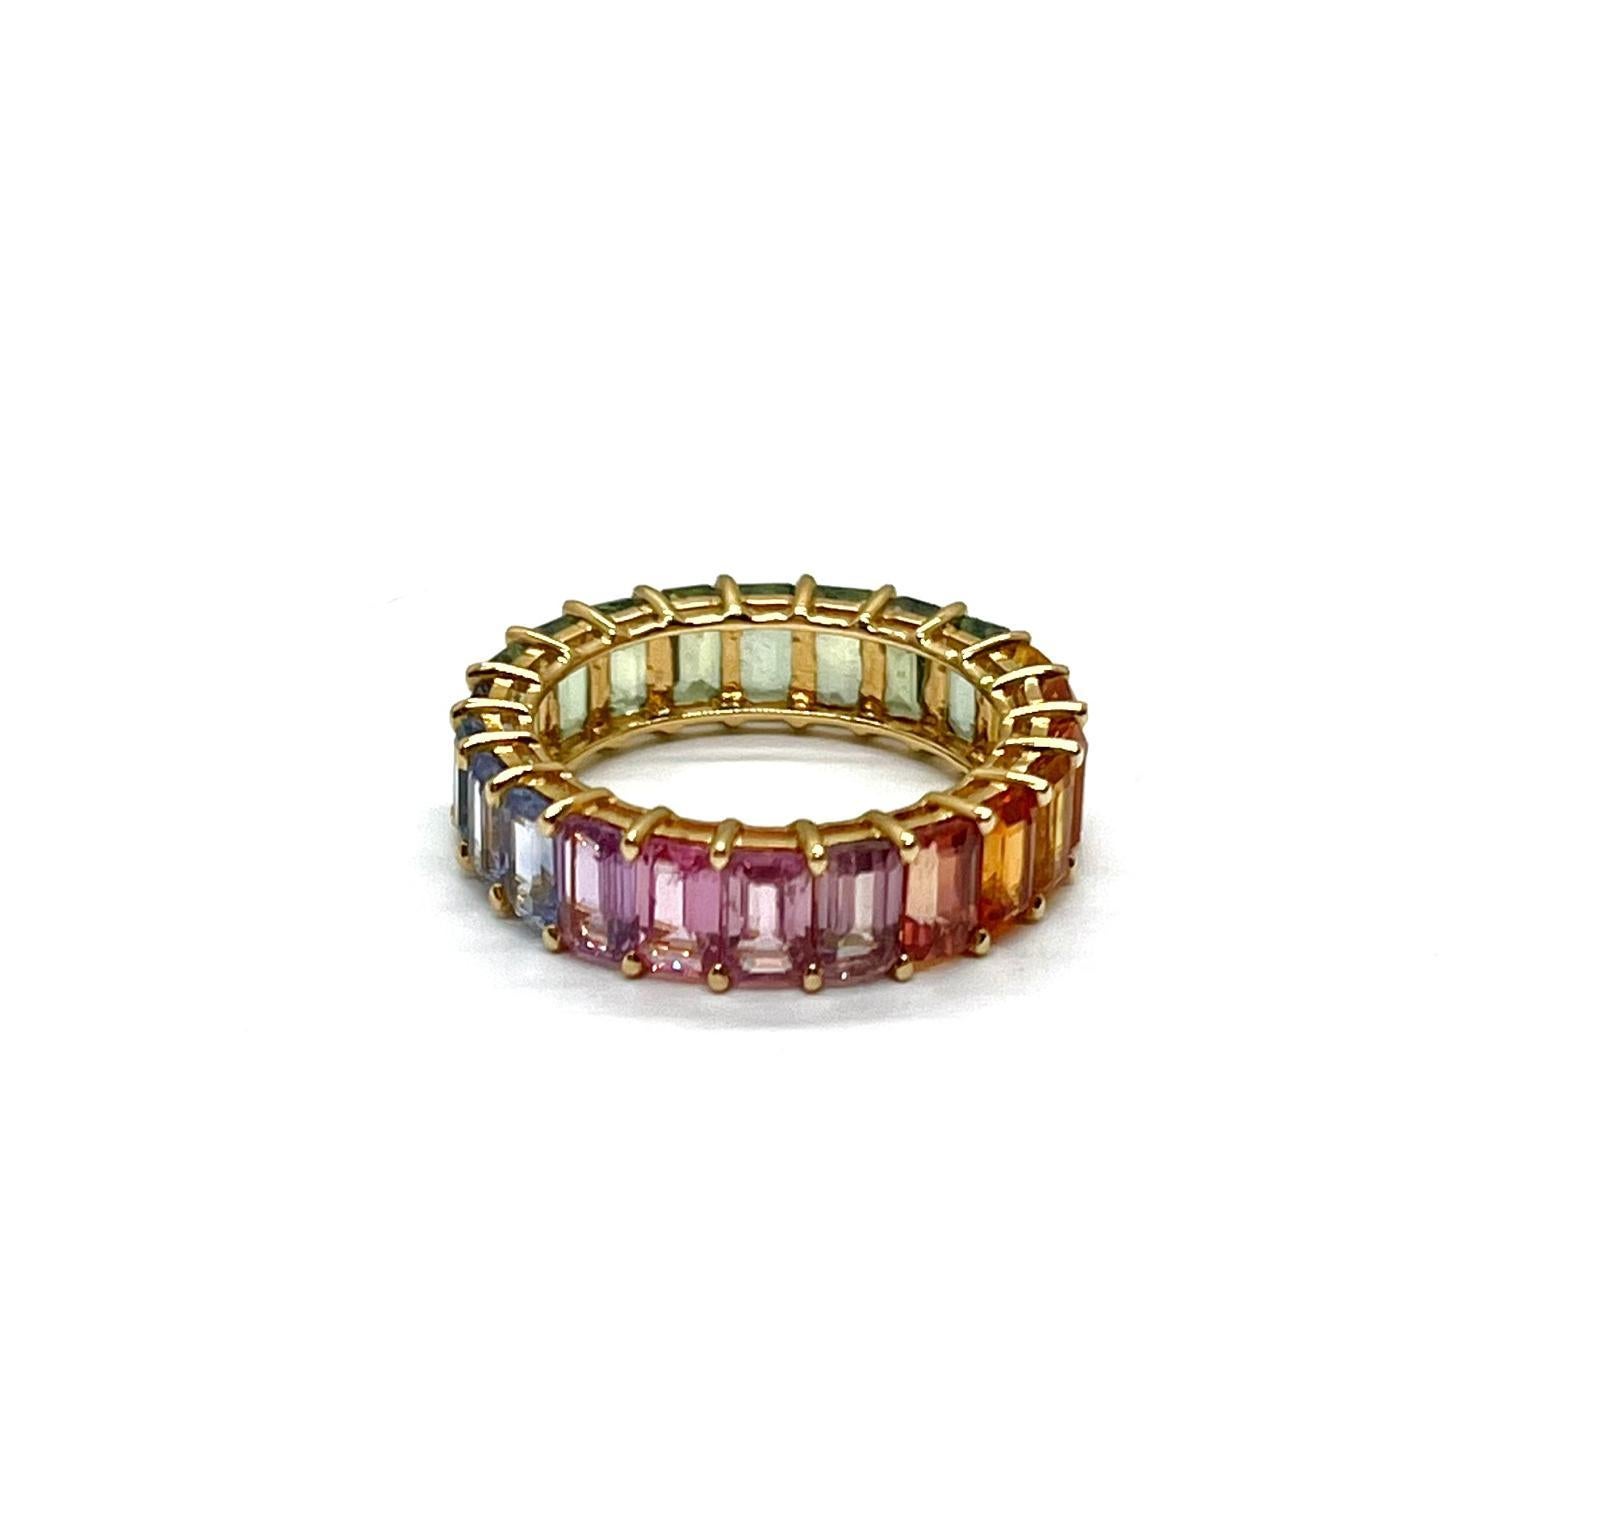 Andreoli Multi-Color Sapphire 18 Karat Yellow Gold Eternity Band

This ring features:
- 8.50 Carat Multi-Color Sapphire
- 2.70 Gram 18K Yellow Gold
- Made In Italy